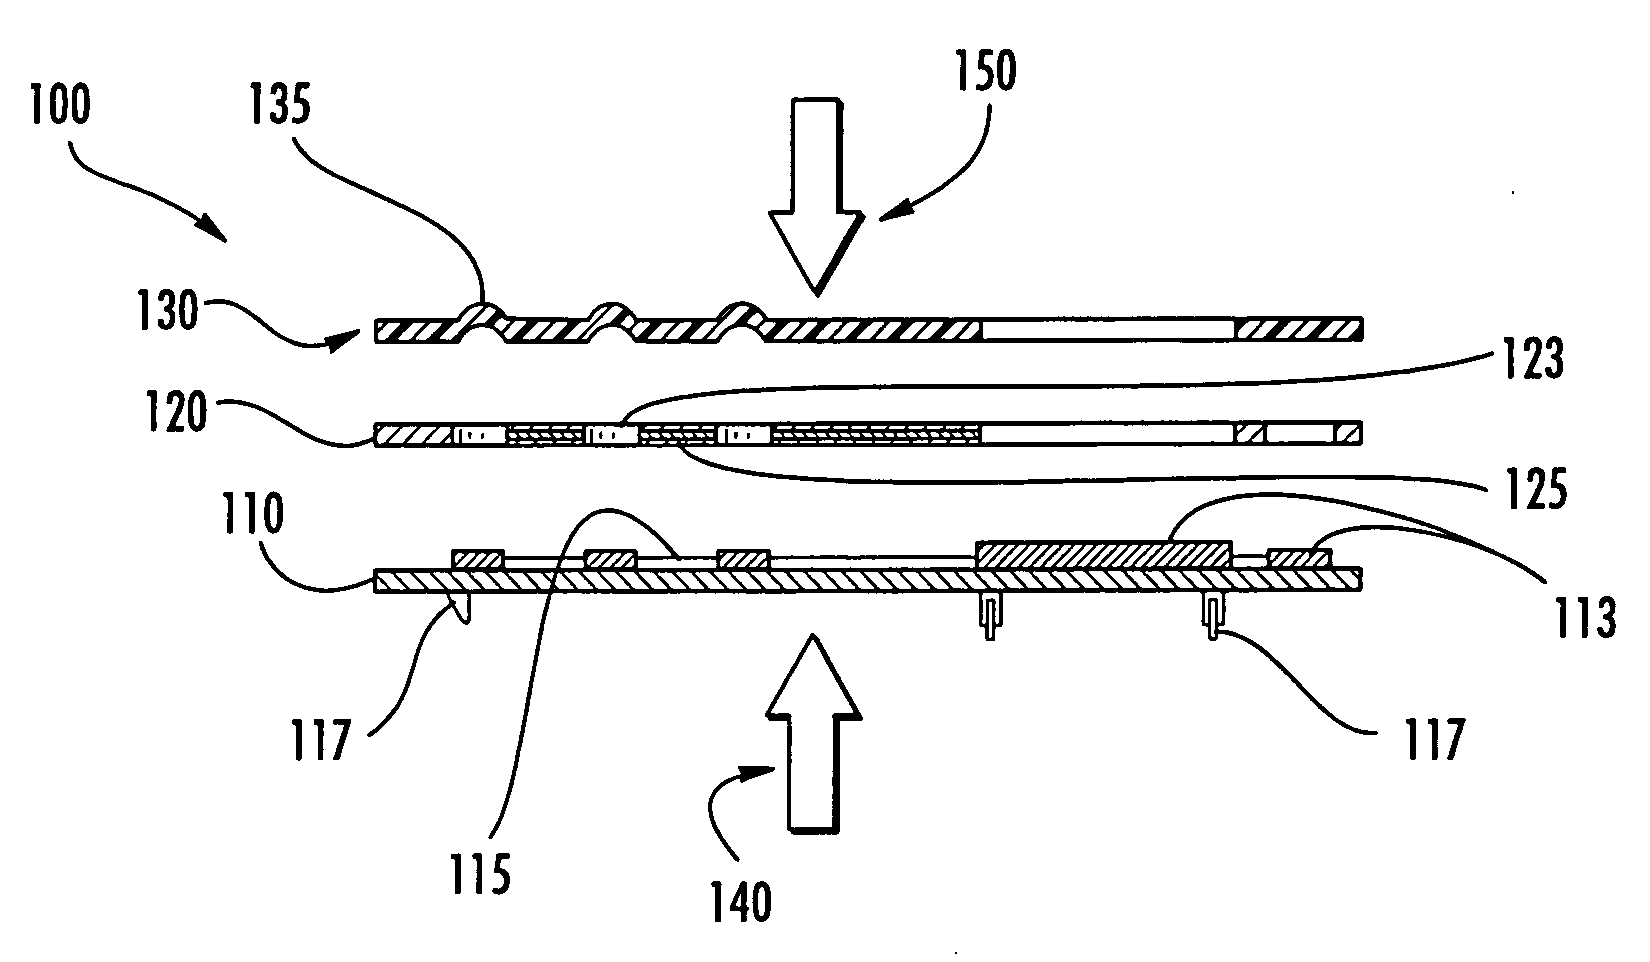 Method for manufacturing a laminate cover, laminate protective layer, and laminate electronic device having a reduced cost, manufacturing time, weight, and thickness